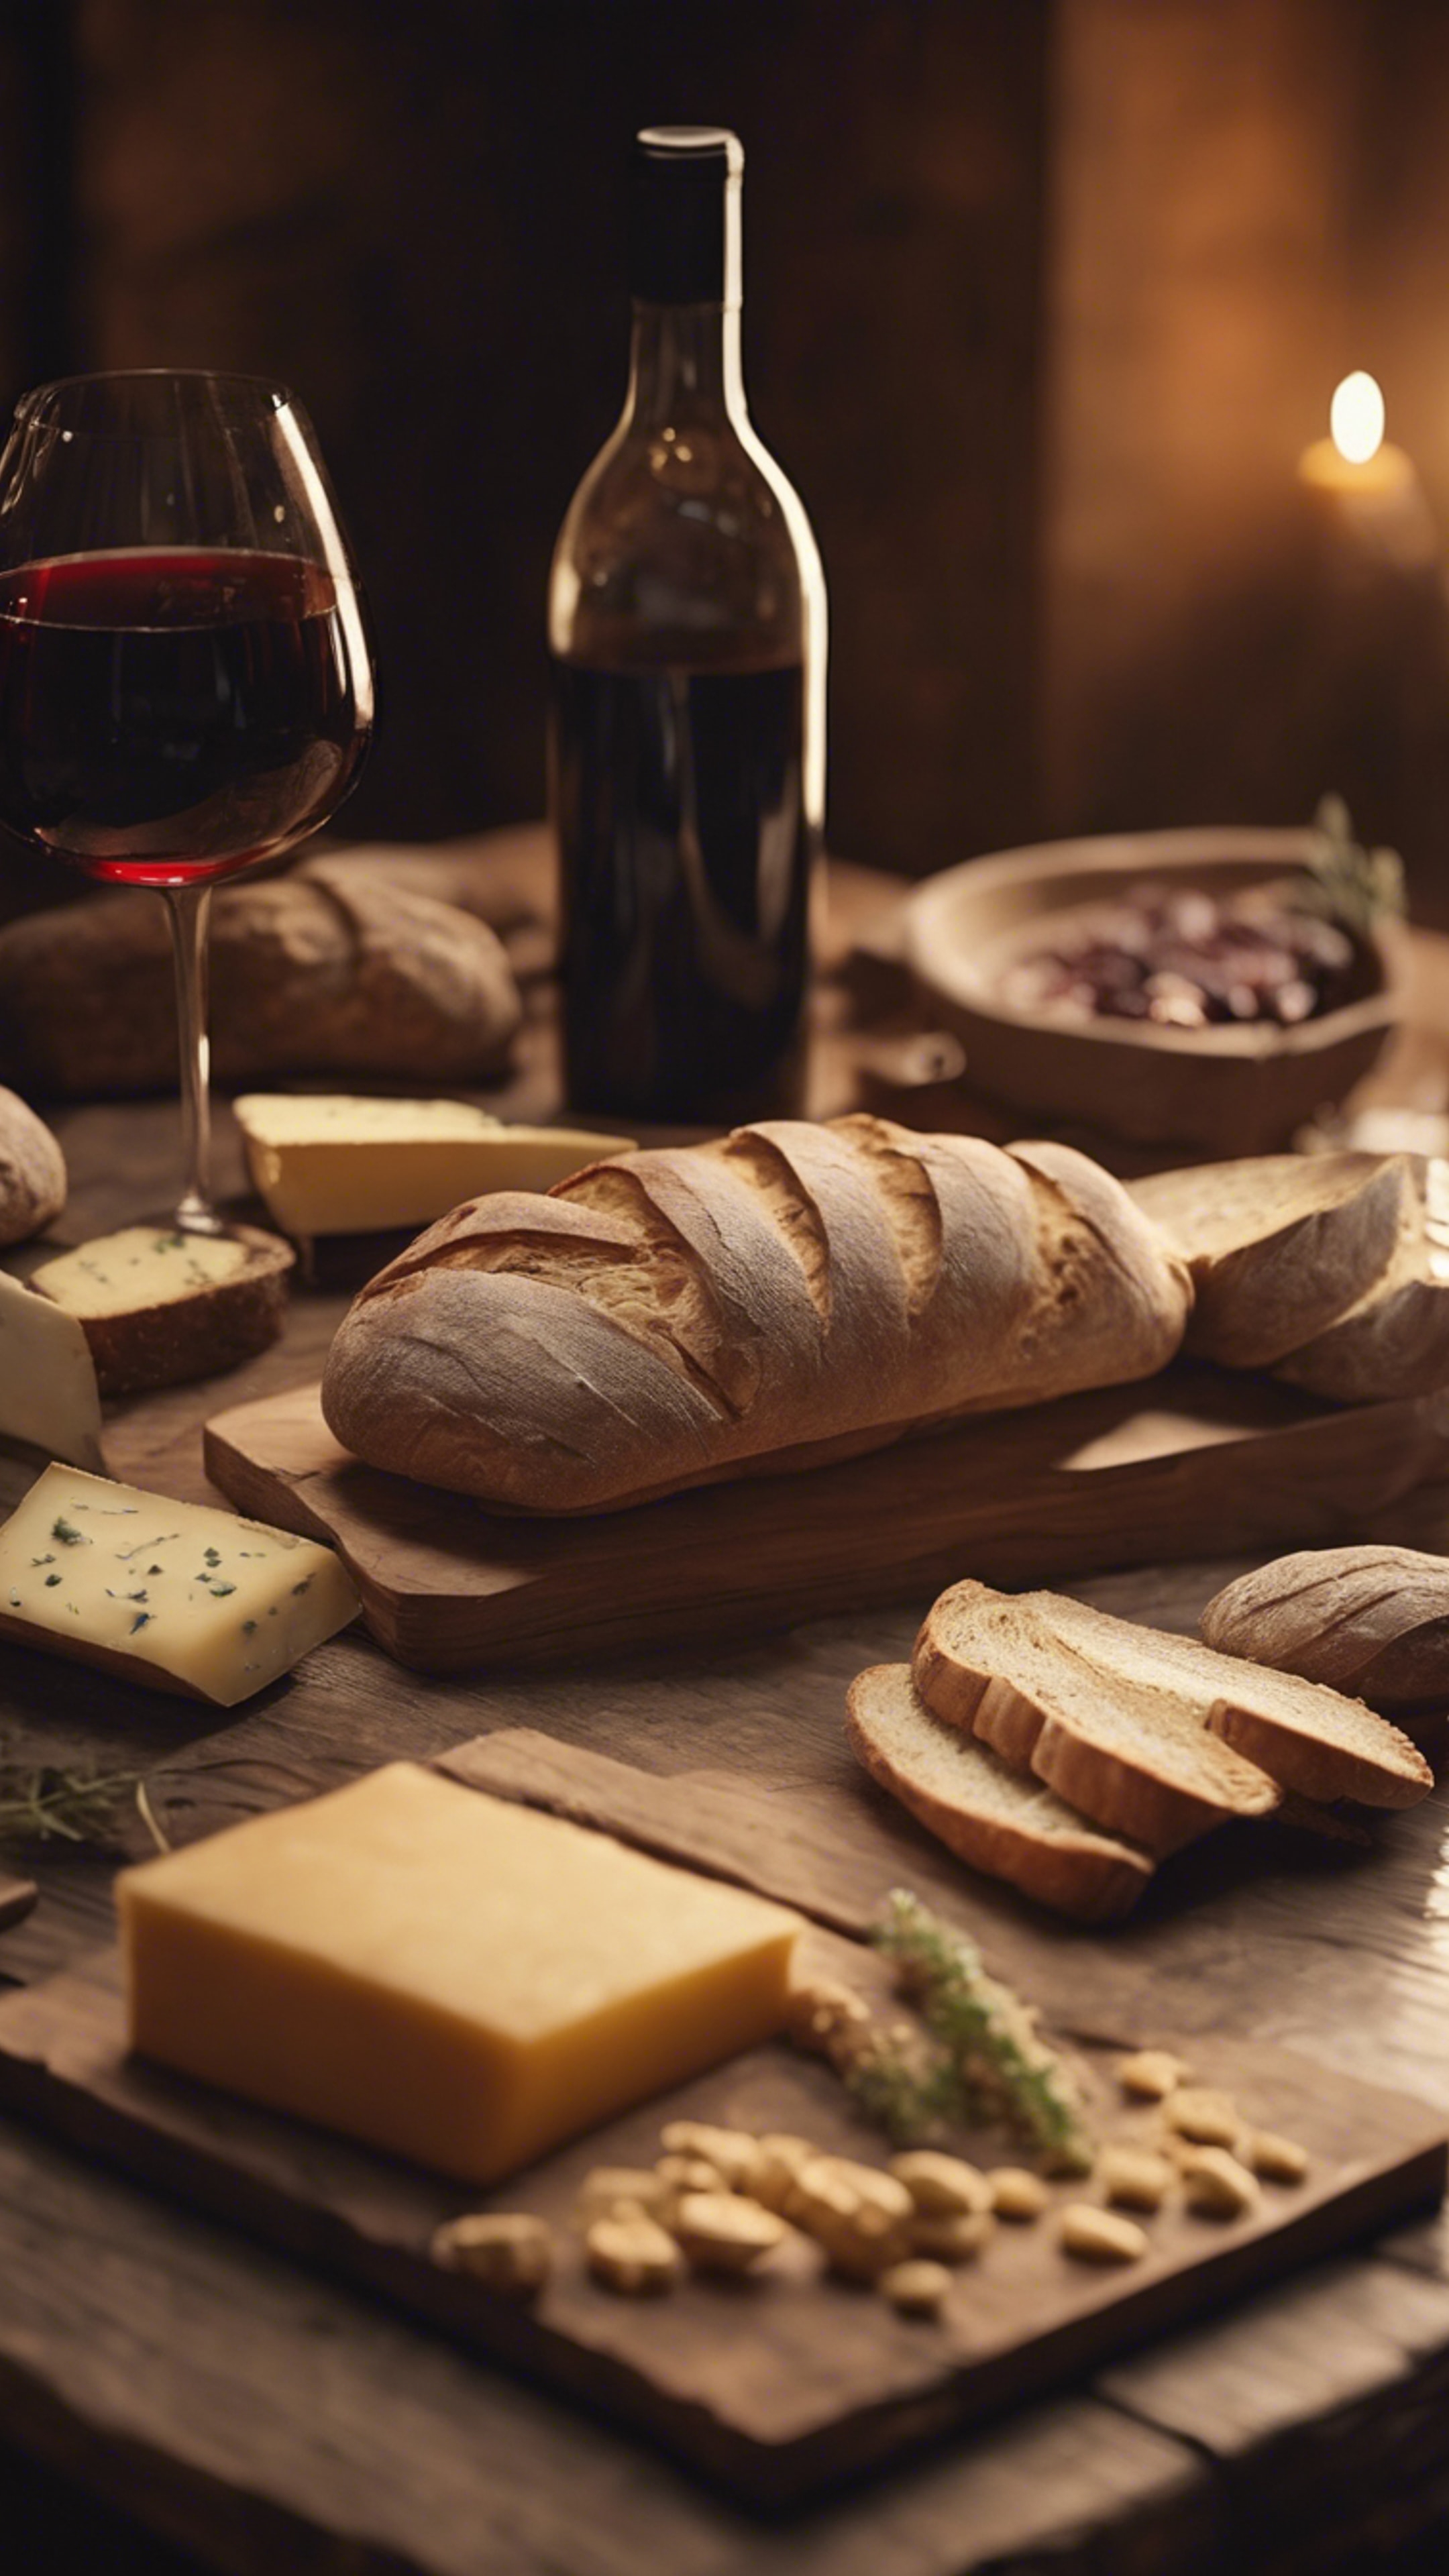 Detailed close-up of a rustic French country-style wooden table set with fresh bread, wine, and cheese under warm interior lighting. Papel de parede[6a74bb7d88b74d998281]